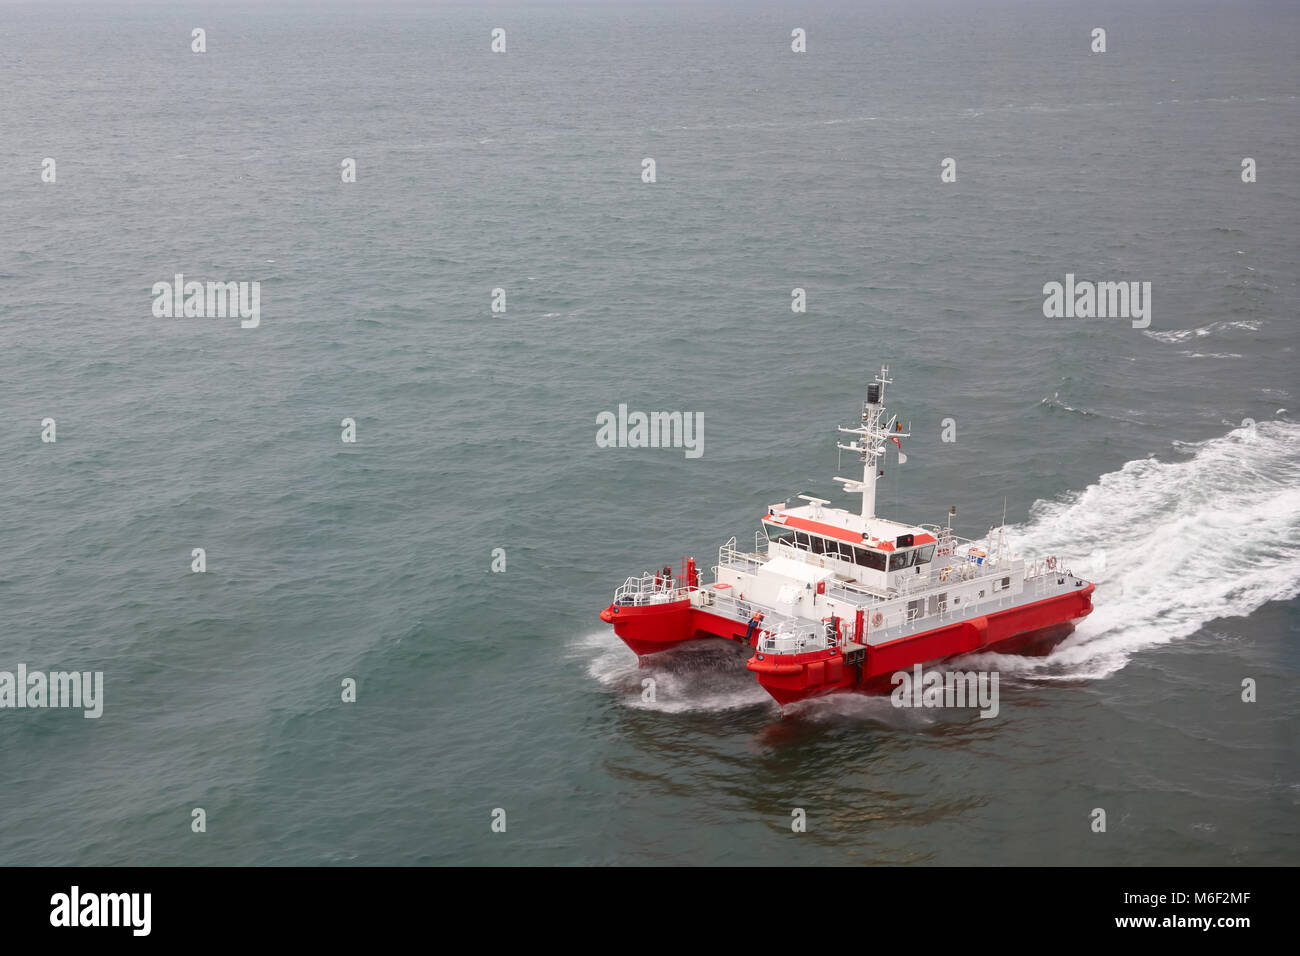 Modern tugboat of red and white color in the sea closeup. Stock Photo